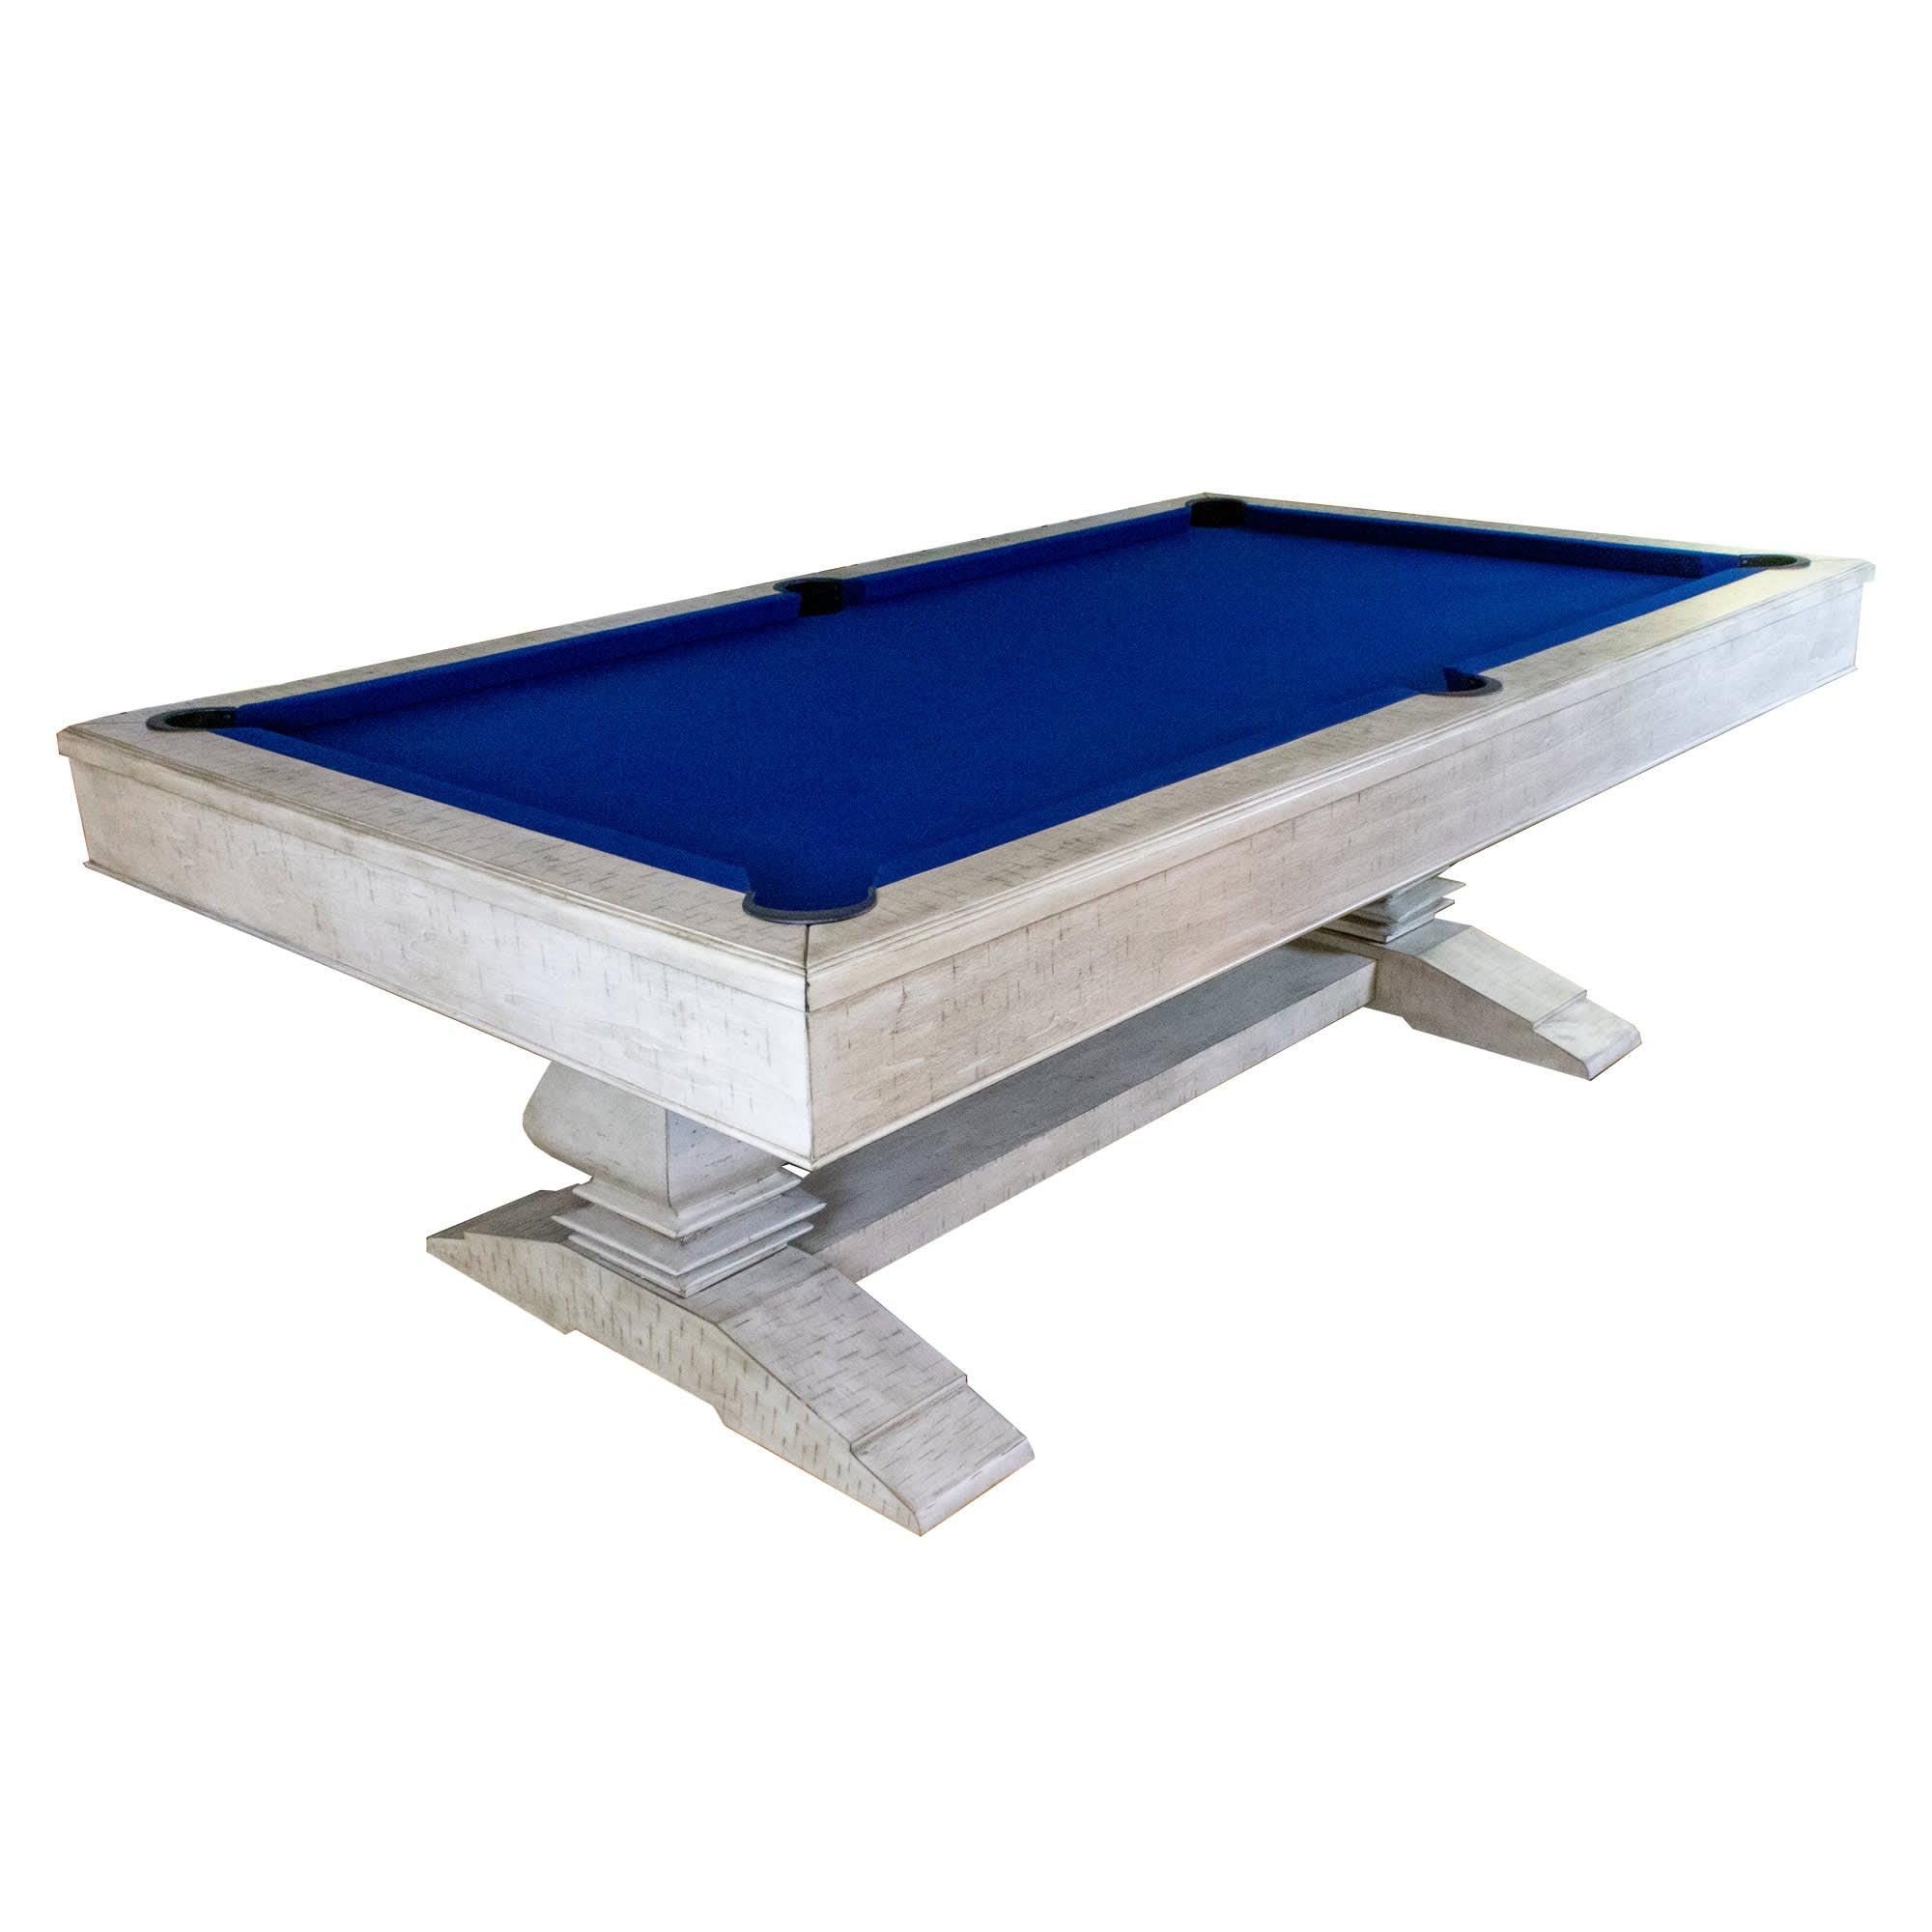 Montecito 8-ft Pool Table - Driftwood